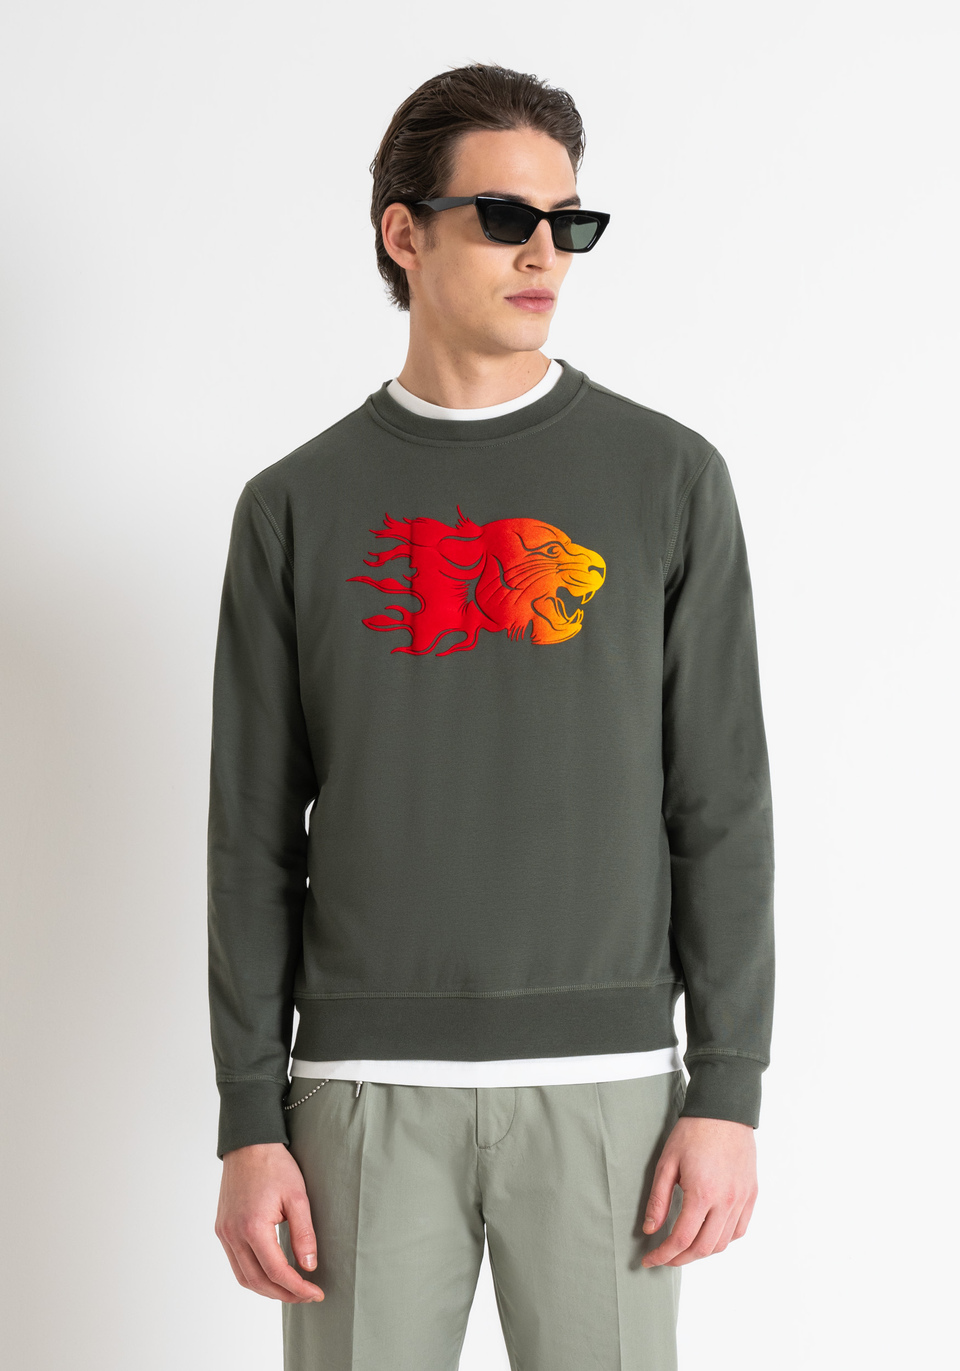 REGULAR FIT SWEATSHIRT IN SUSTAINABLE COTTON-POLYESTER BLEND WITH FADED FLOCK PRINT - Antony Morato Online Shop